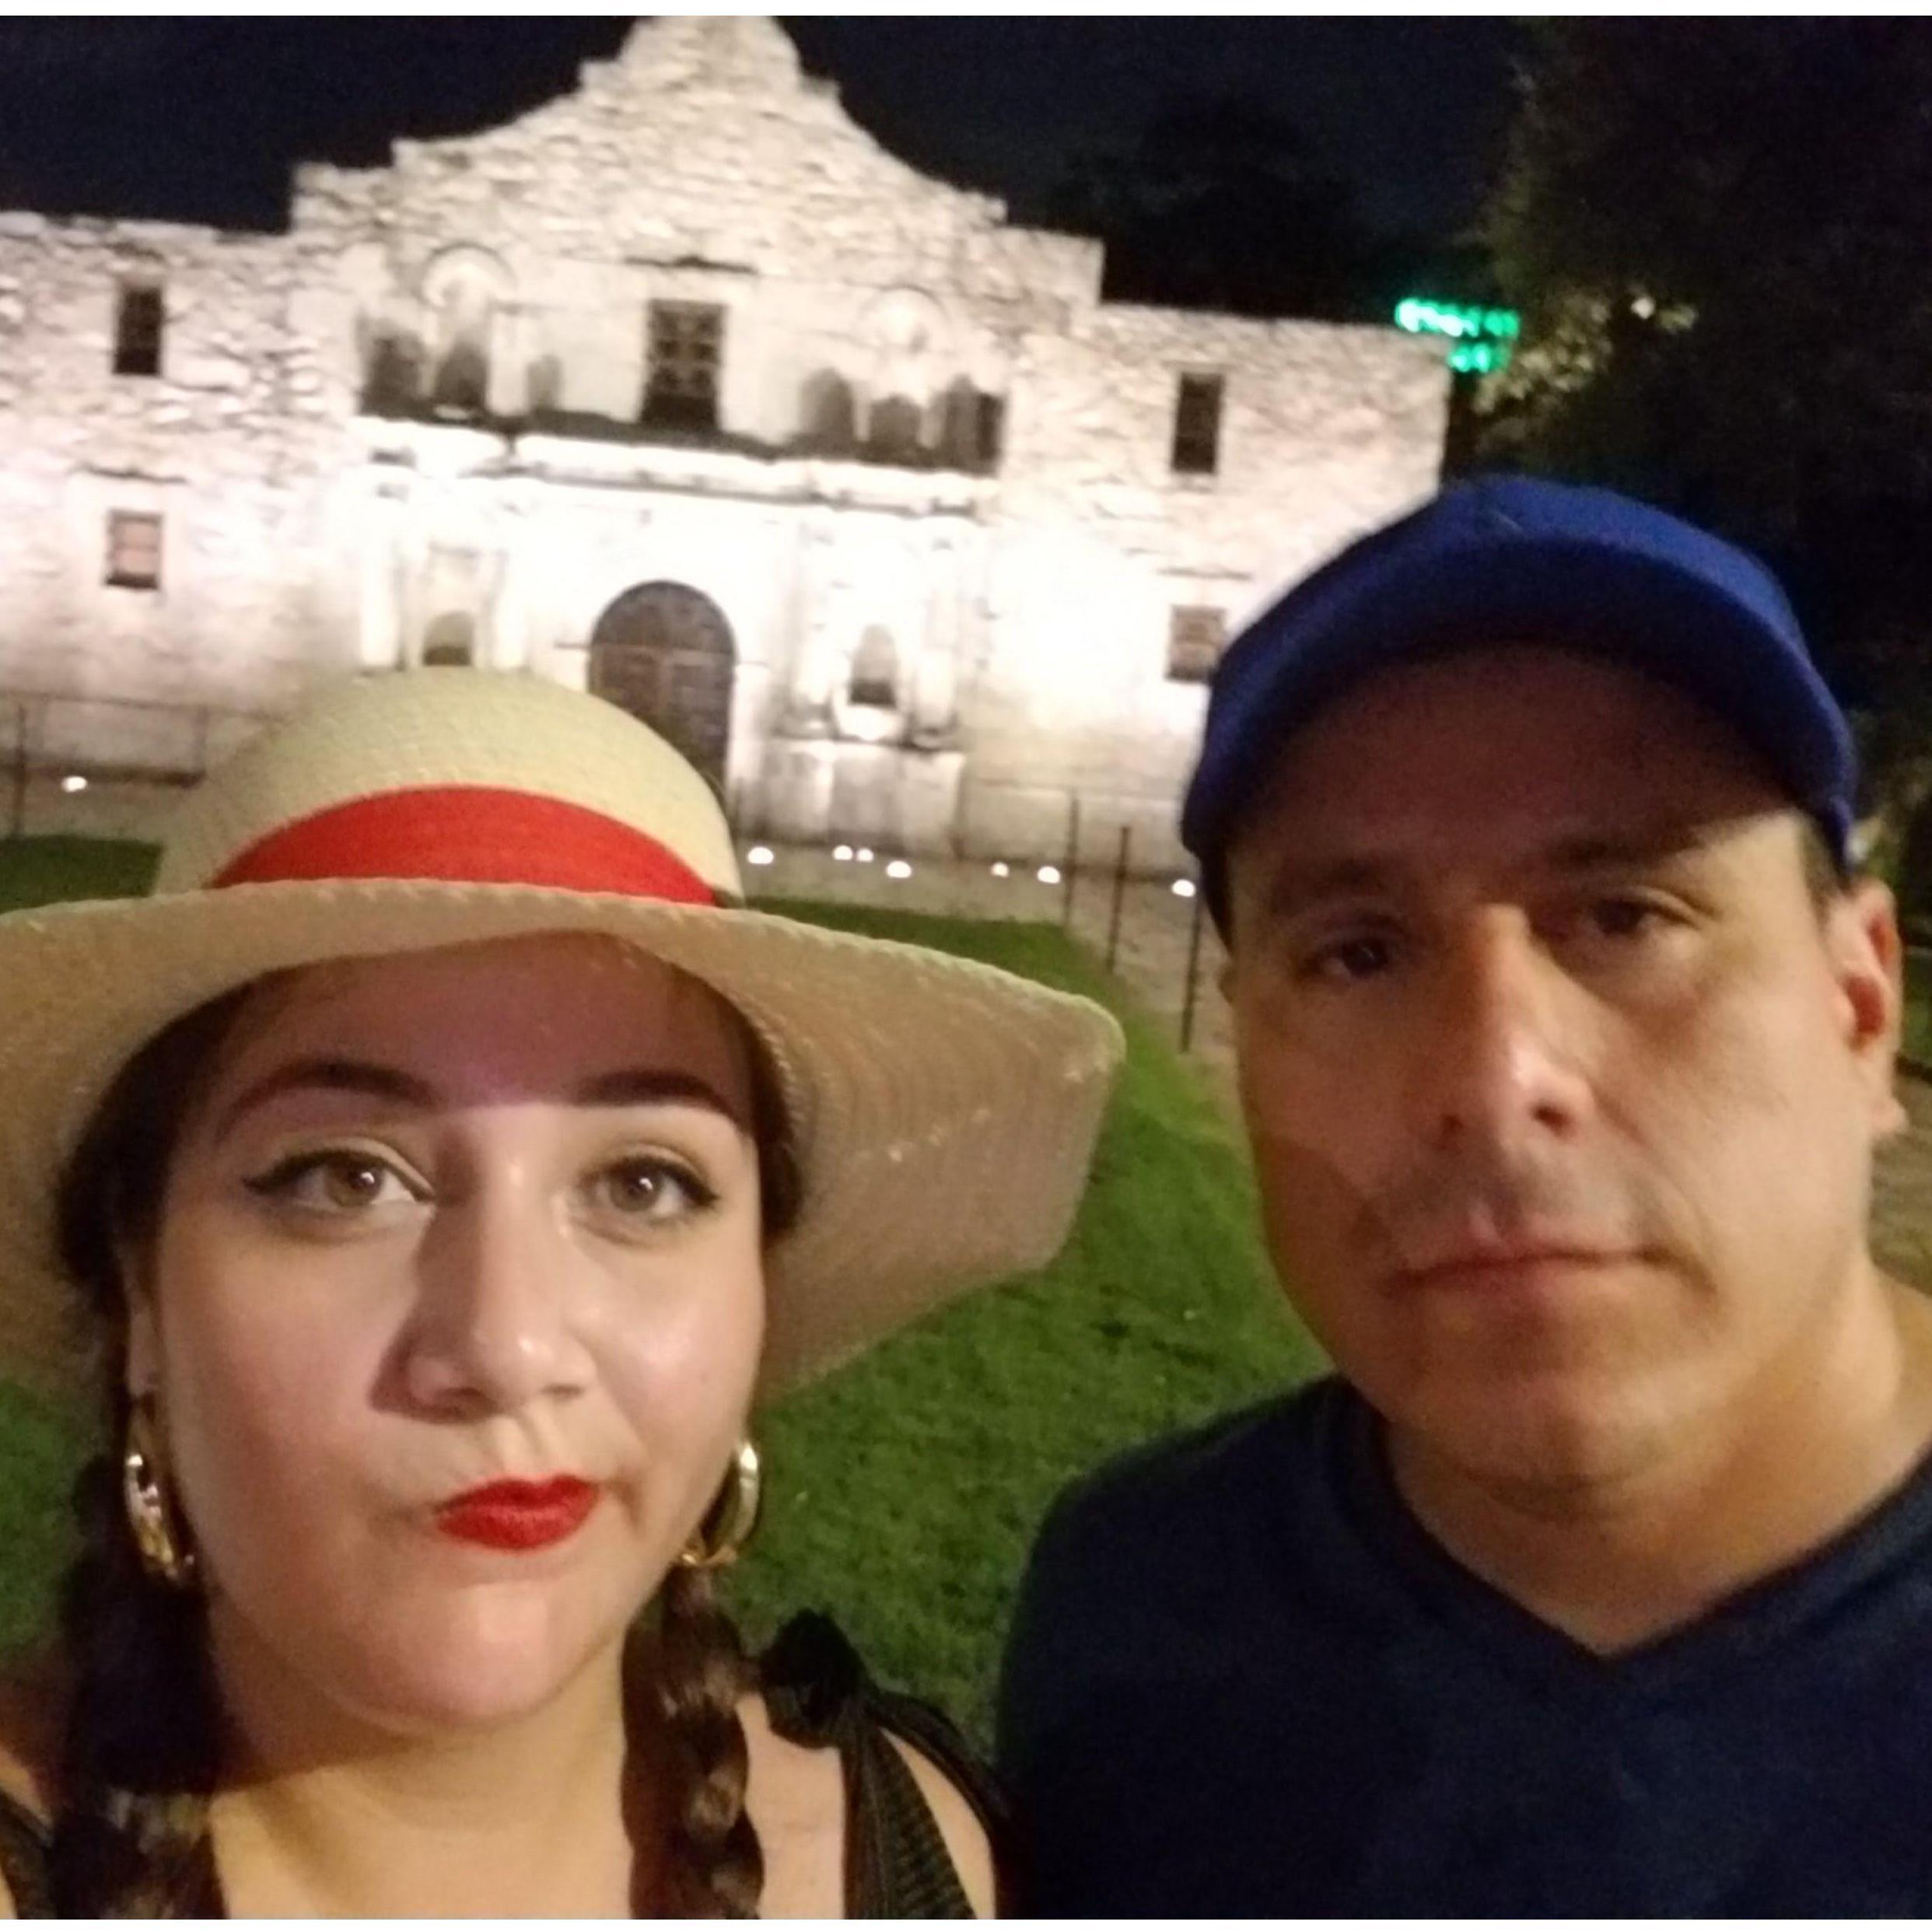 2017 - Thrilled to visit The Alamo